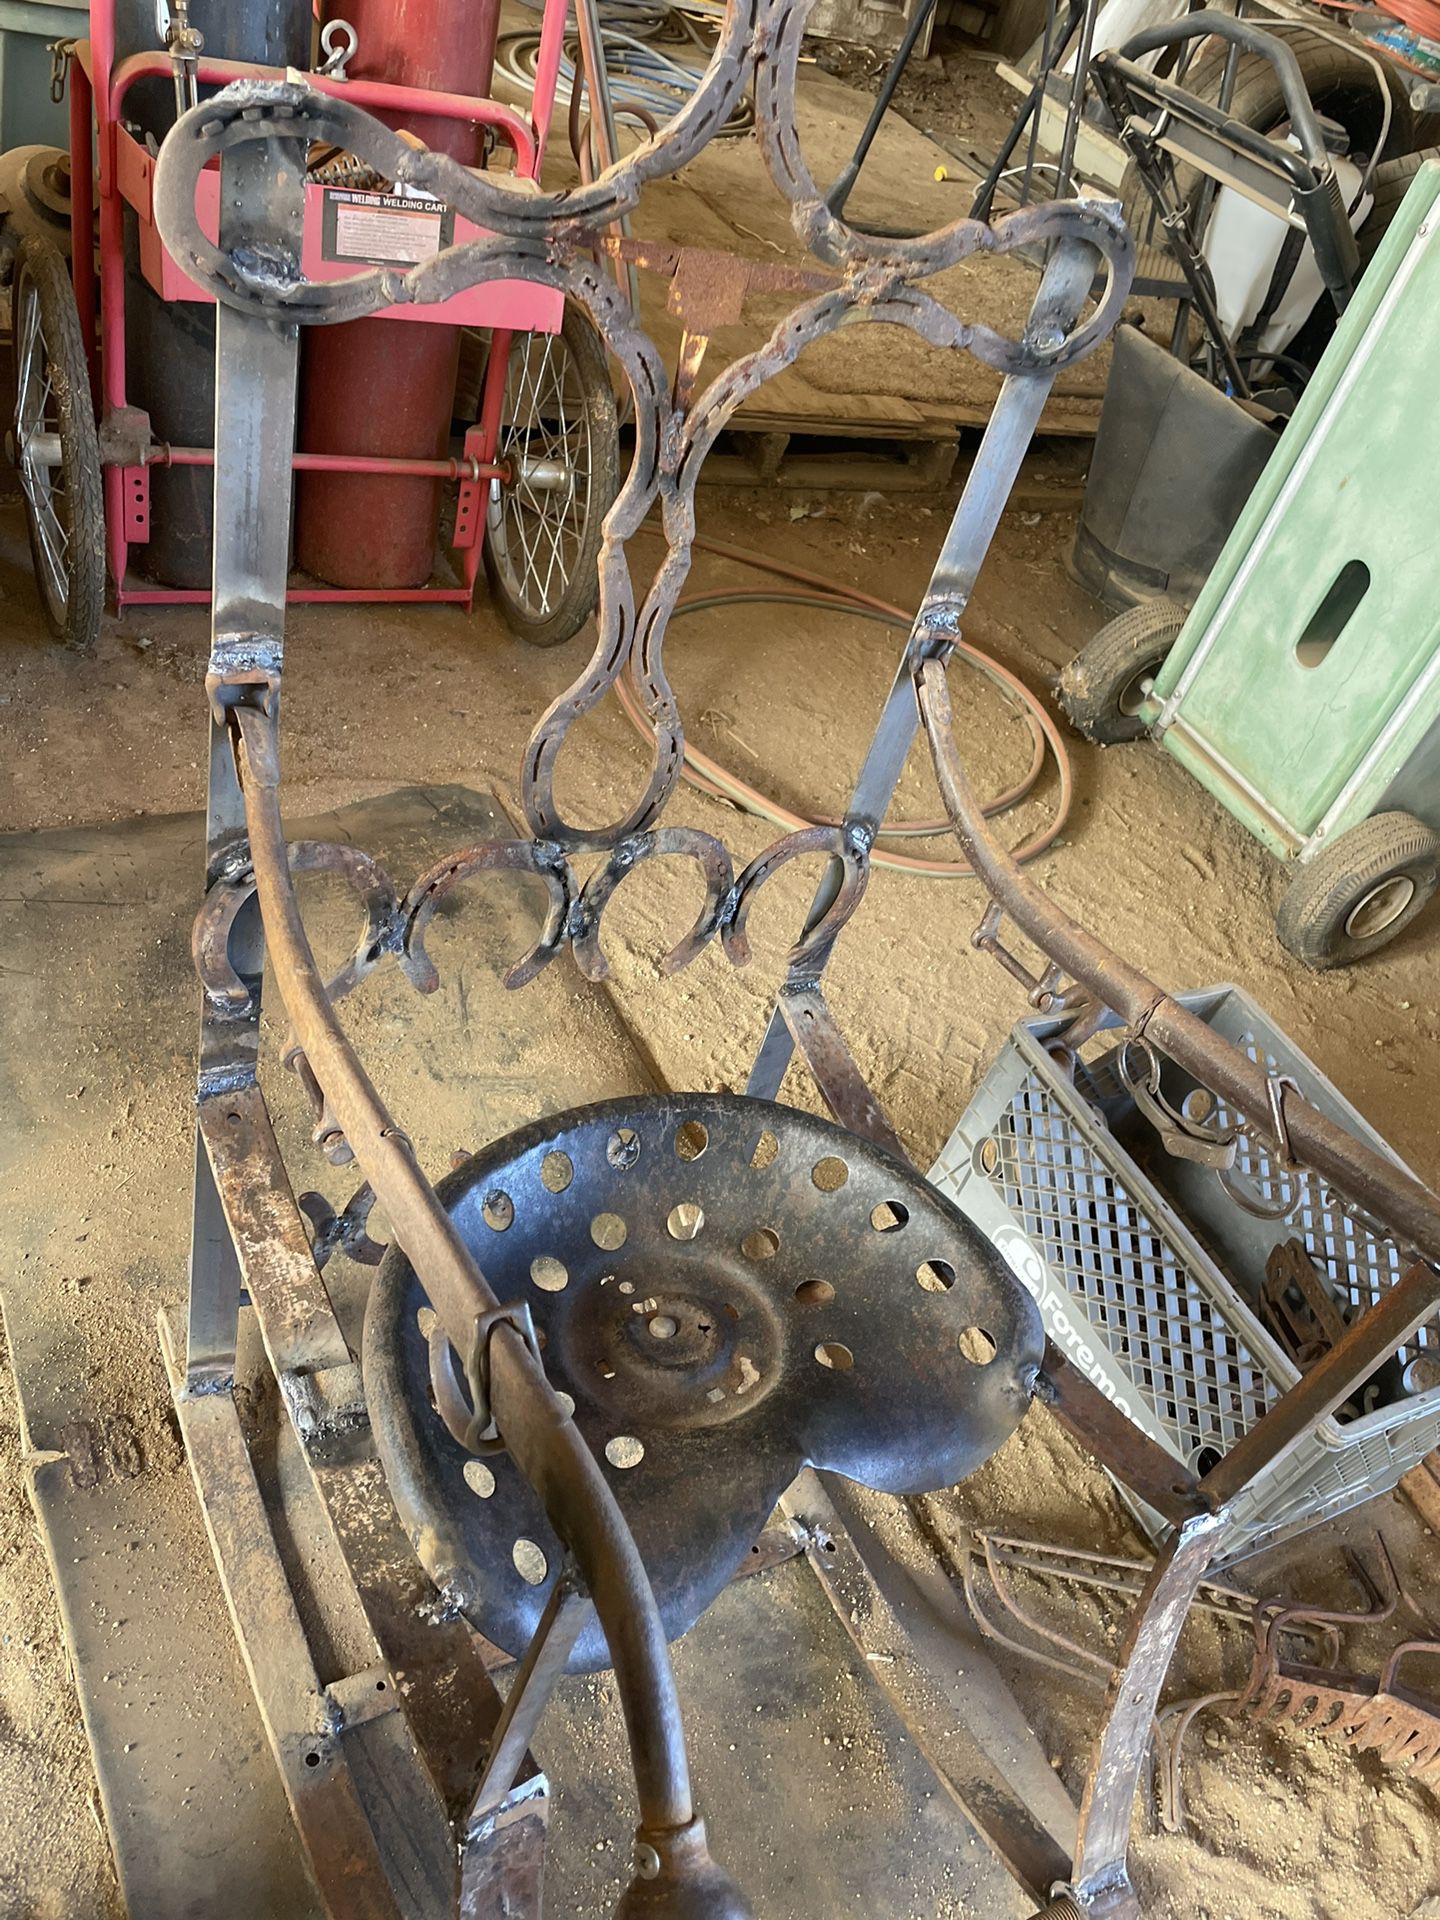 Horseshoe Tractor Seat Rocking Chair 